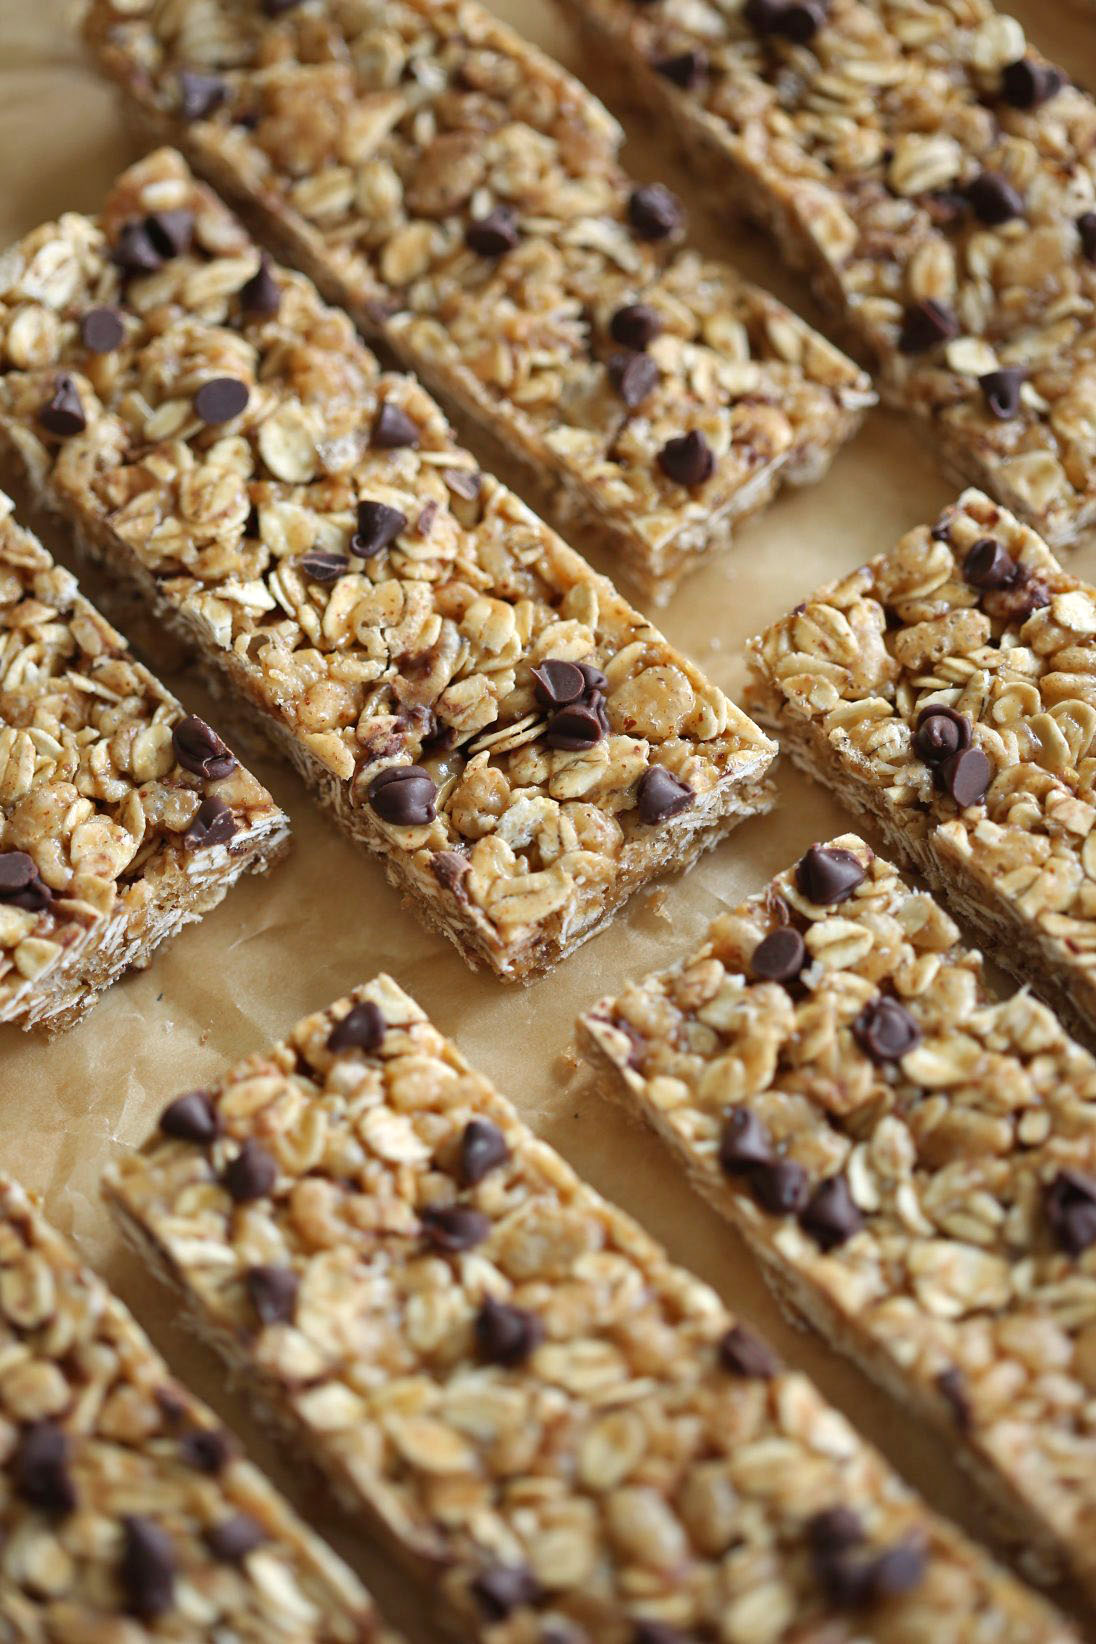 These No Bake Almond Butter Granola Bars are healthy, delicious and can easily be made in just 15 minutes!  Perfect to grab on-the-go in the mornings too!